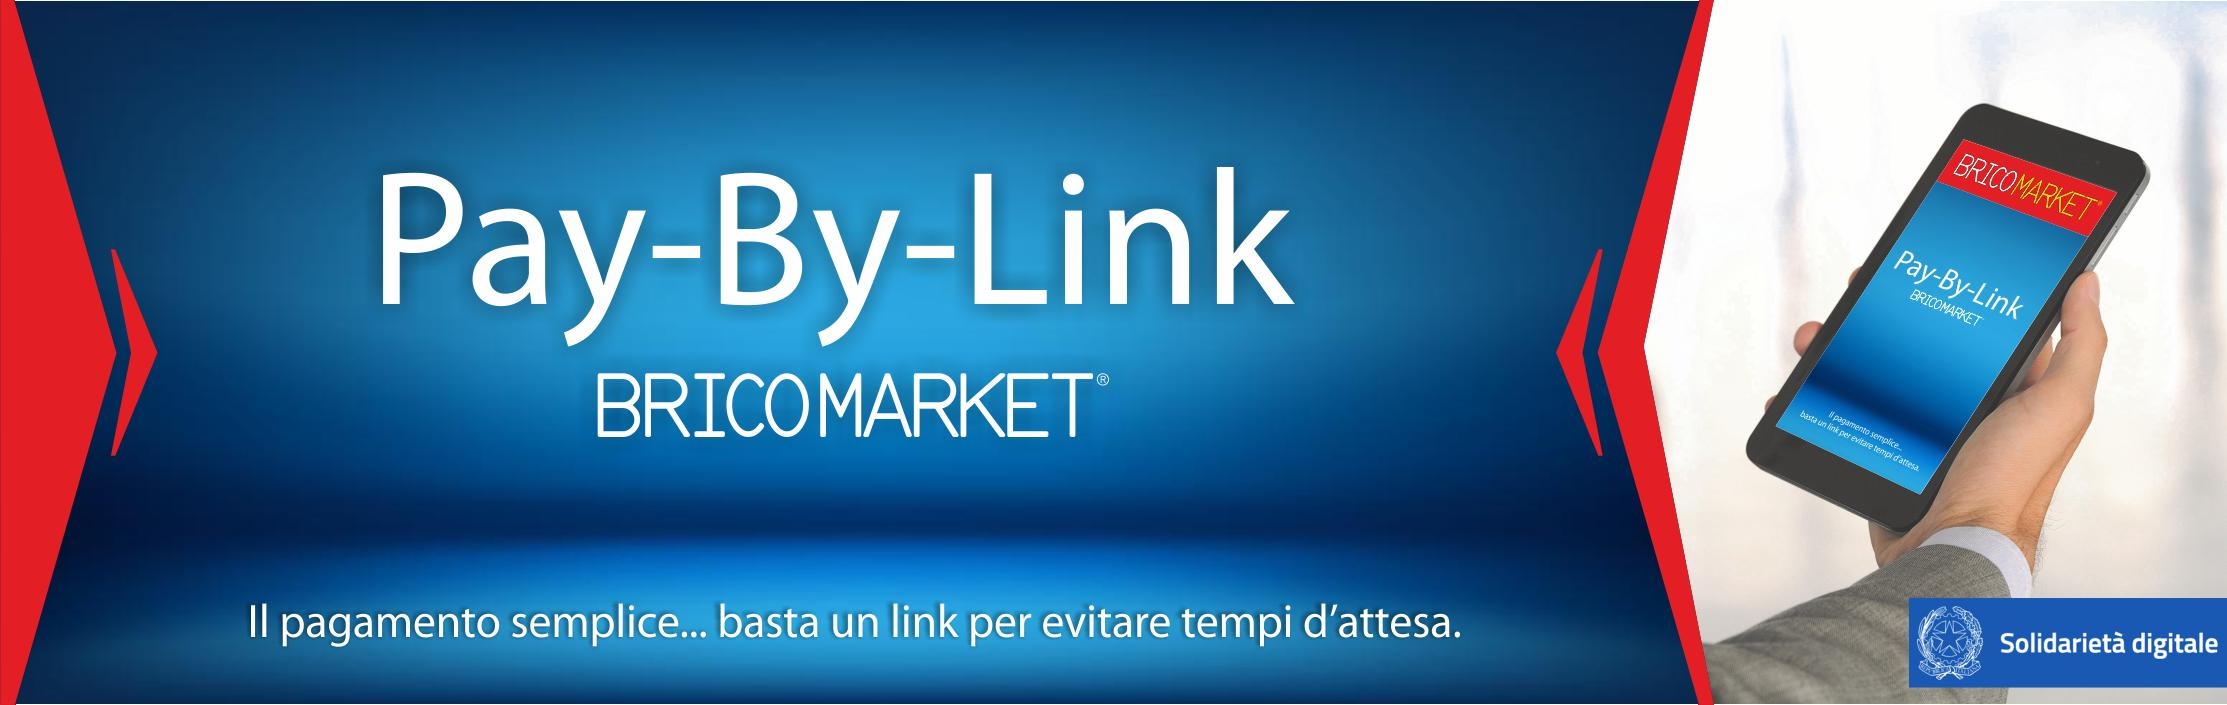 PAY BY LINK